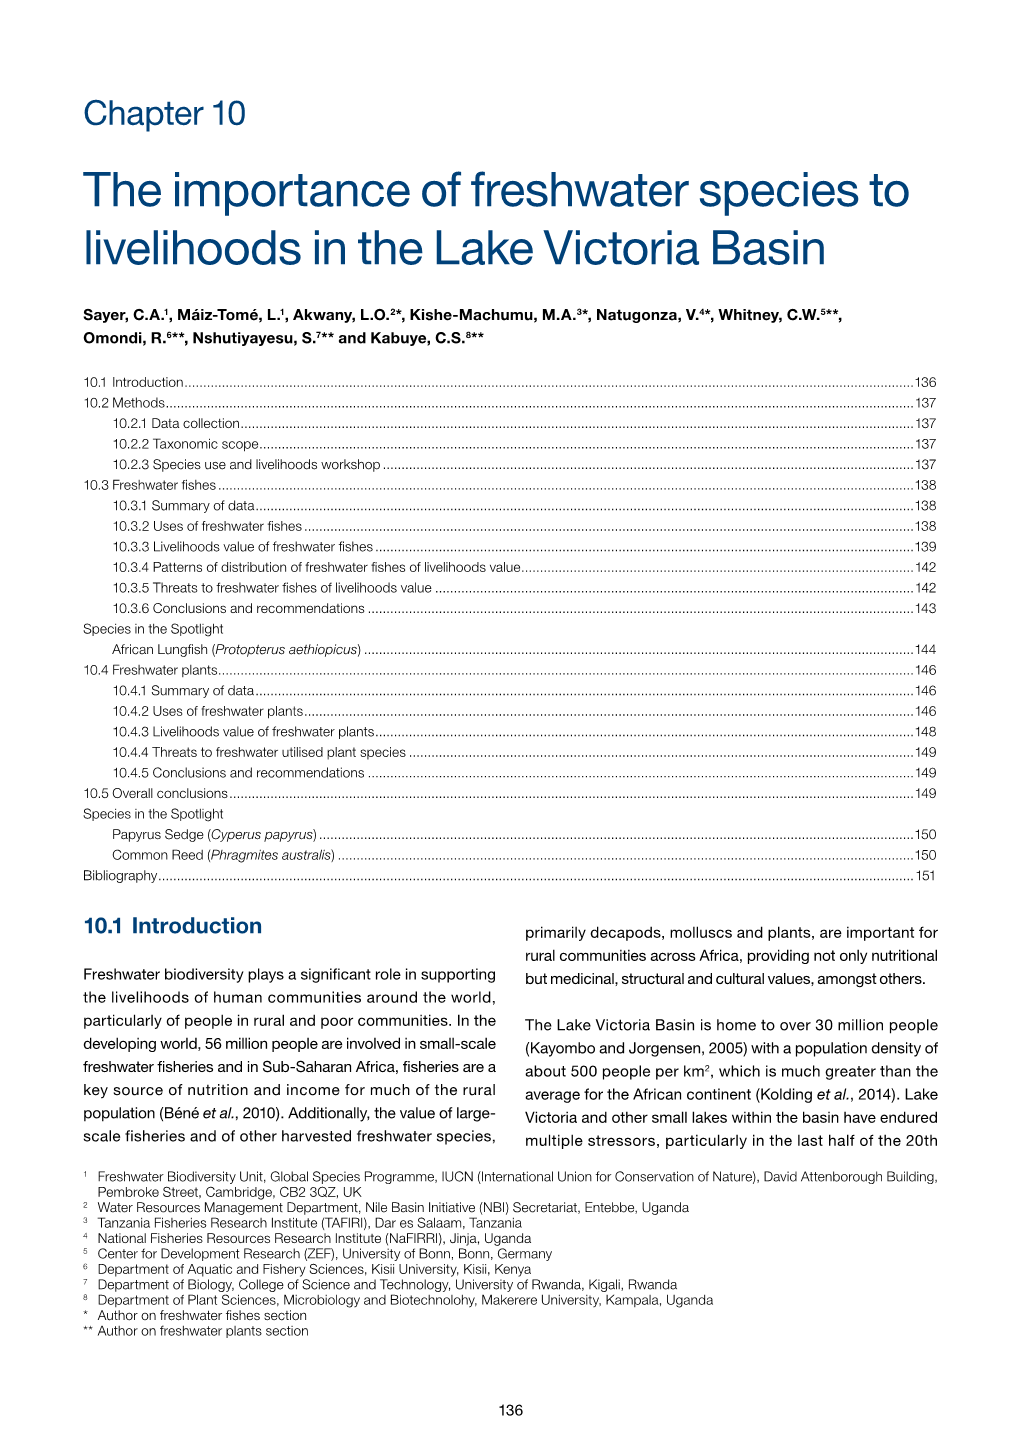 The Importance of Freshwater Species to Livelihoods in the Lake Victoria Basin